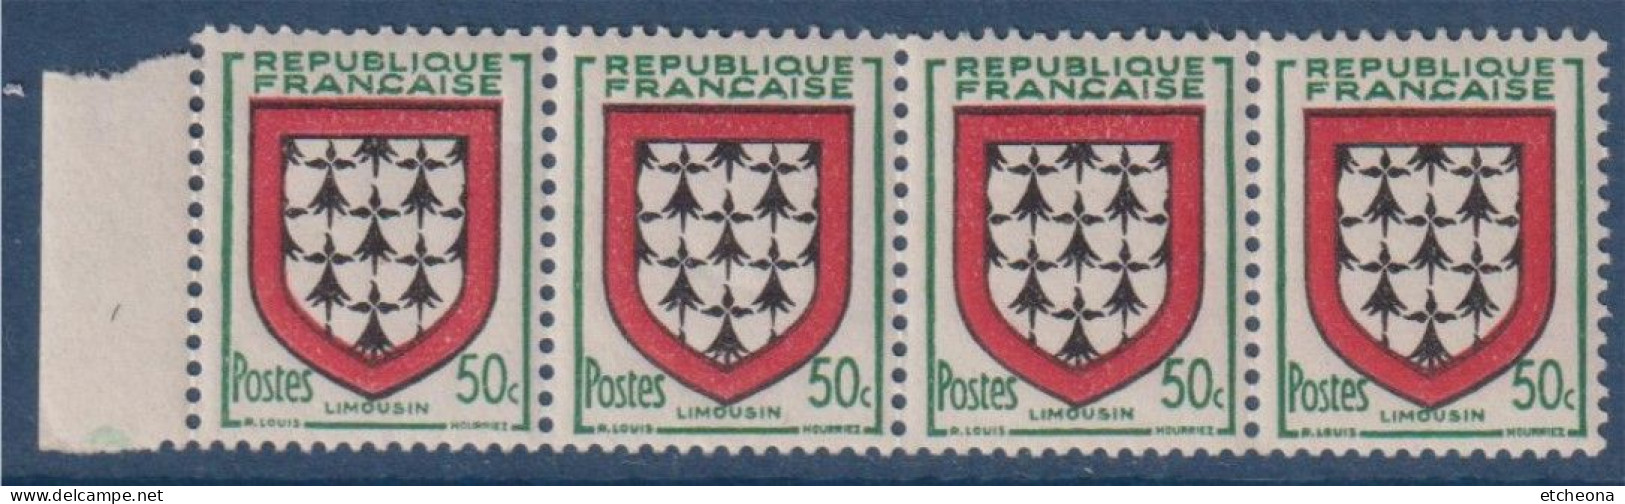 Limousin Armoiries De Provinces V N°900 Bande 4 Timbres Neufs Avec BdF - 1941-66 Coat Of Arms And Heraldry